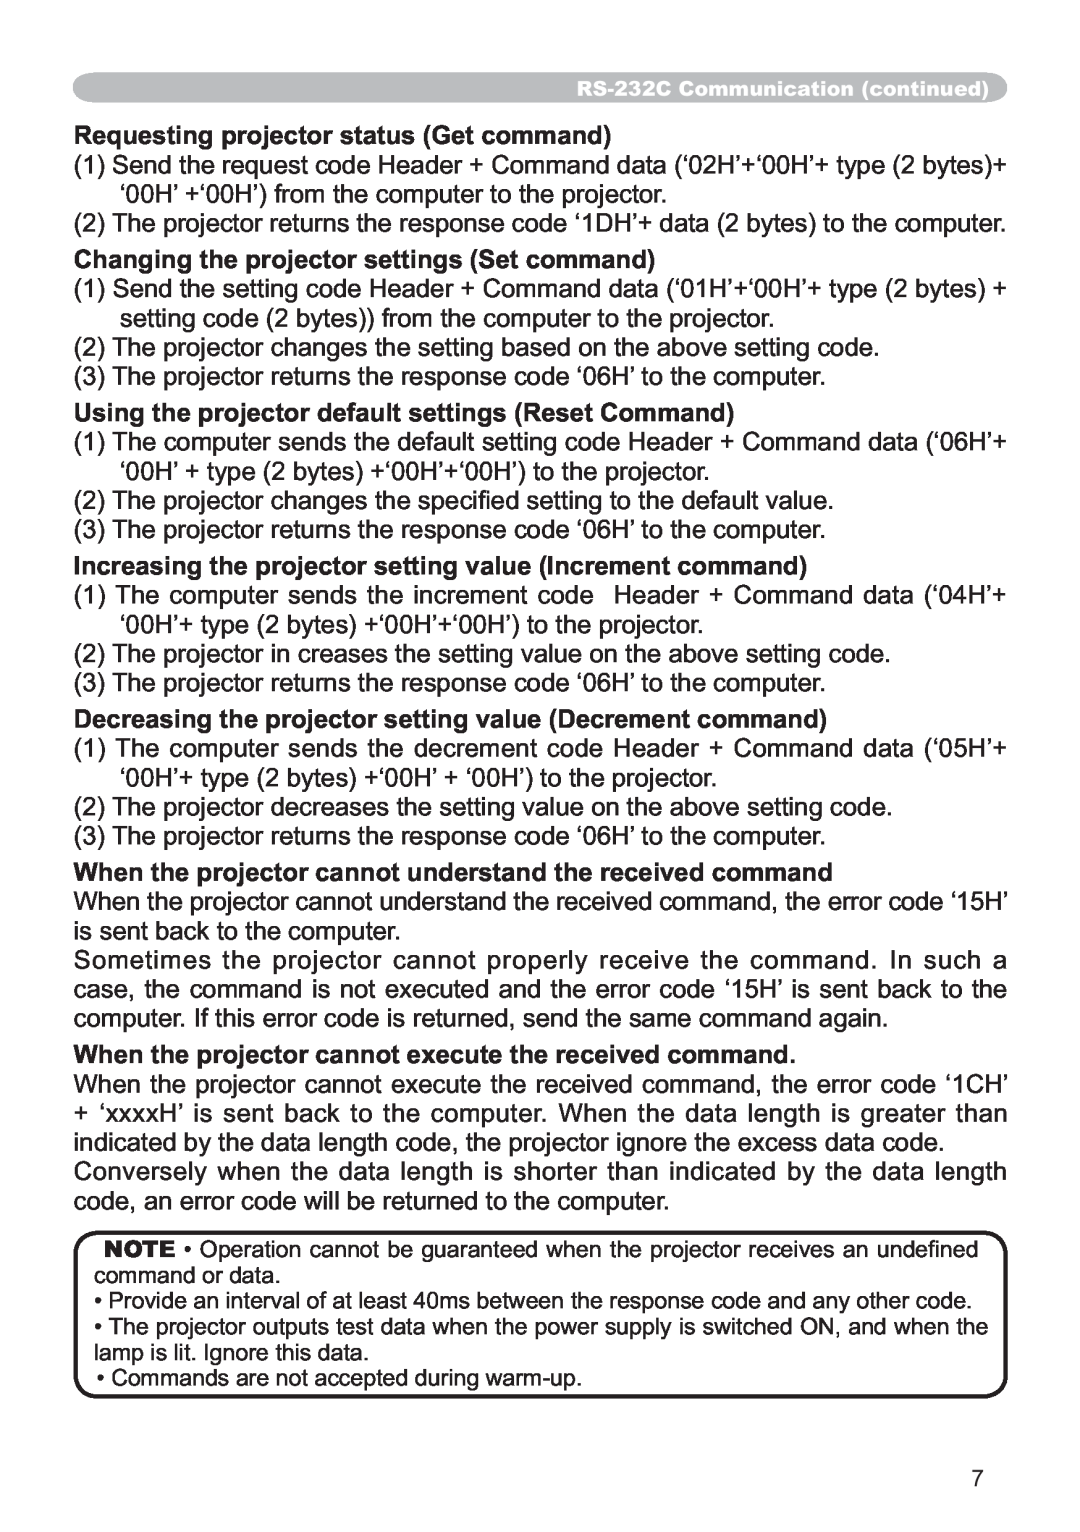 Hitachi ED-X12 user manual Requesting projector status Get command, Changing the projector settings Set command 